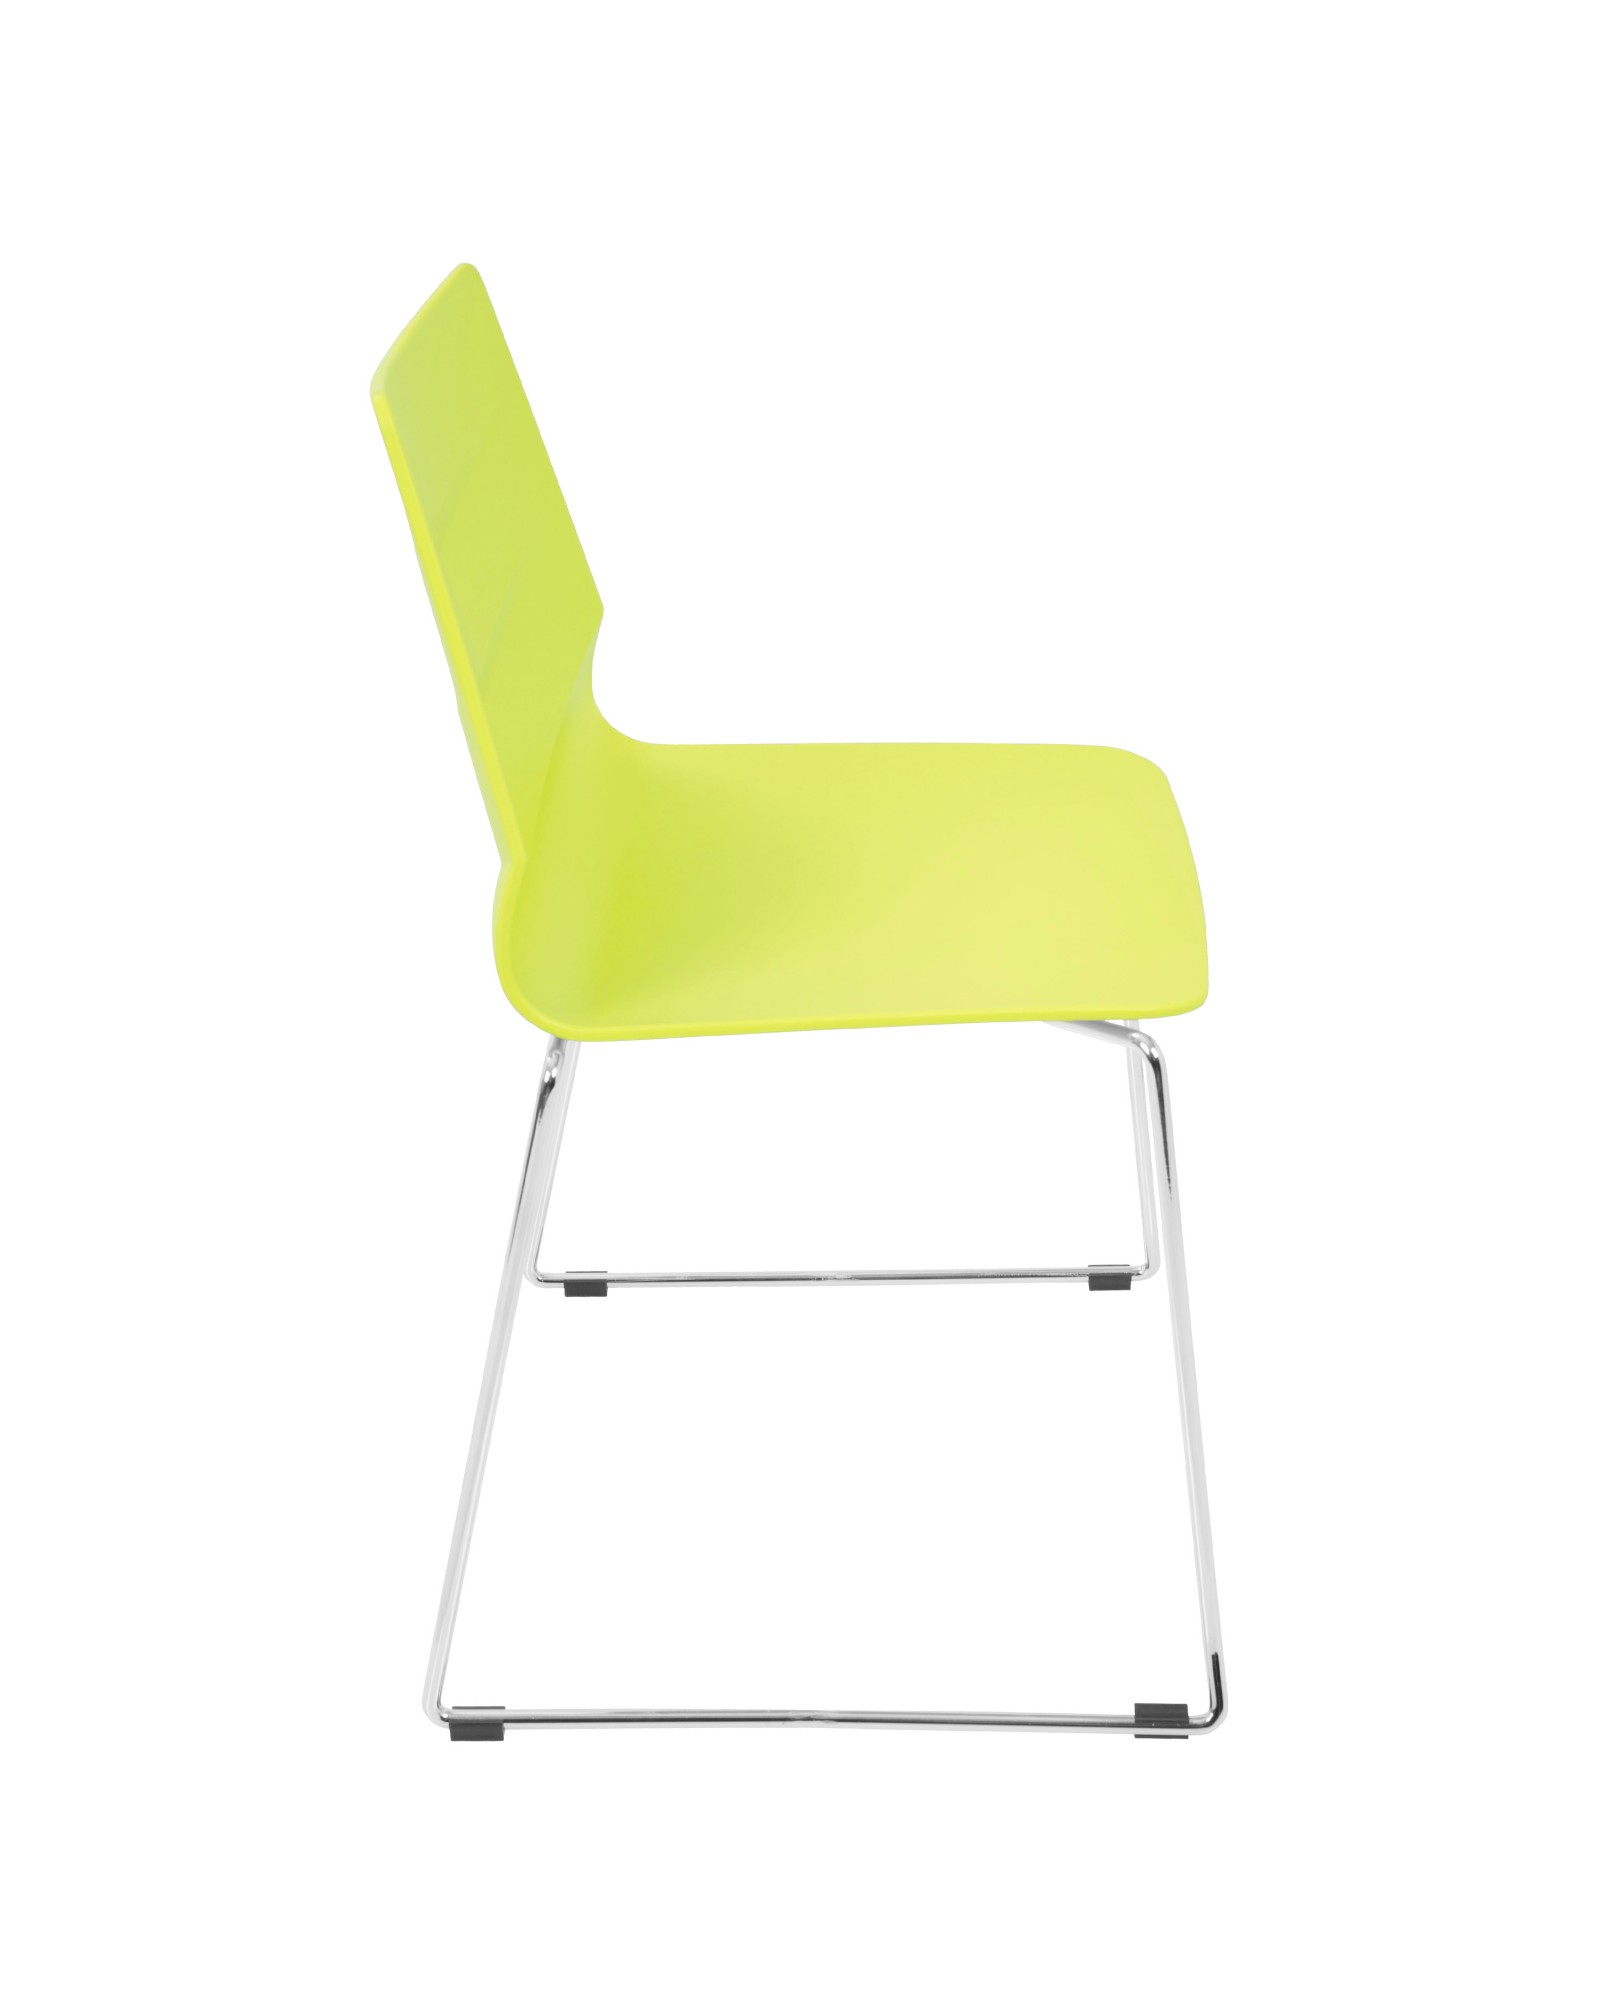 Arrow Contemporary Dining Chair in Lime Green - Set of 2